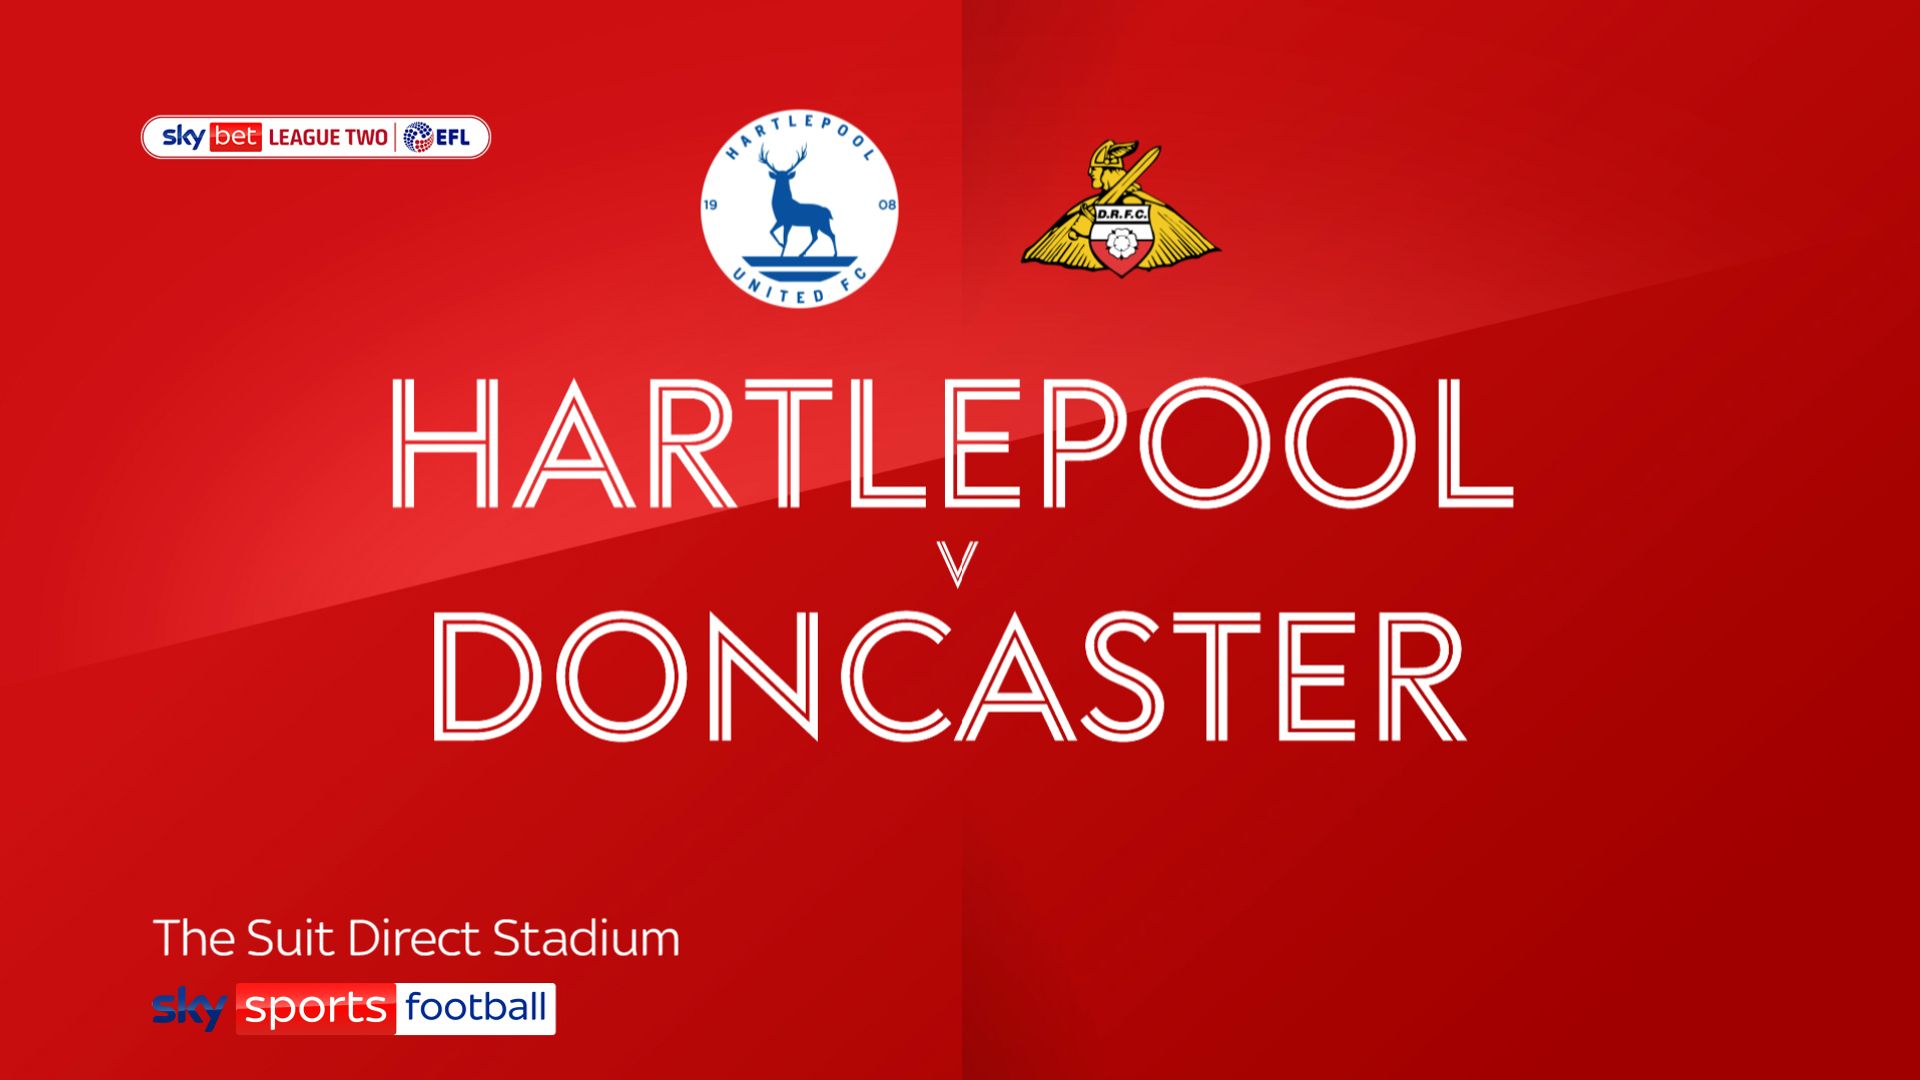 Hartlepool 2-1 Doncaster: Wes McDonald strikes late to give hosts first win of season